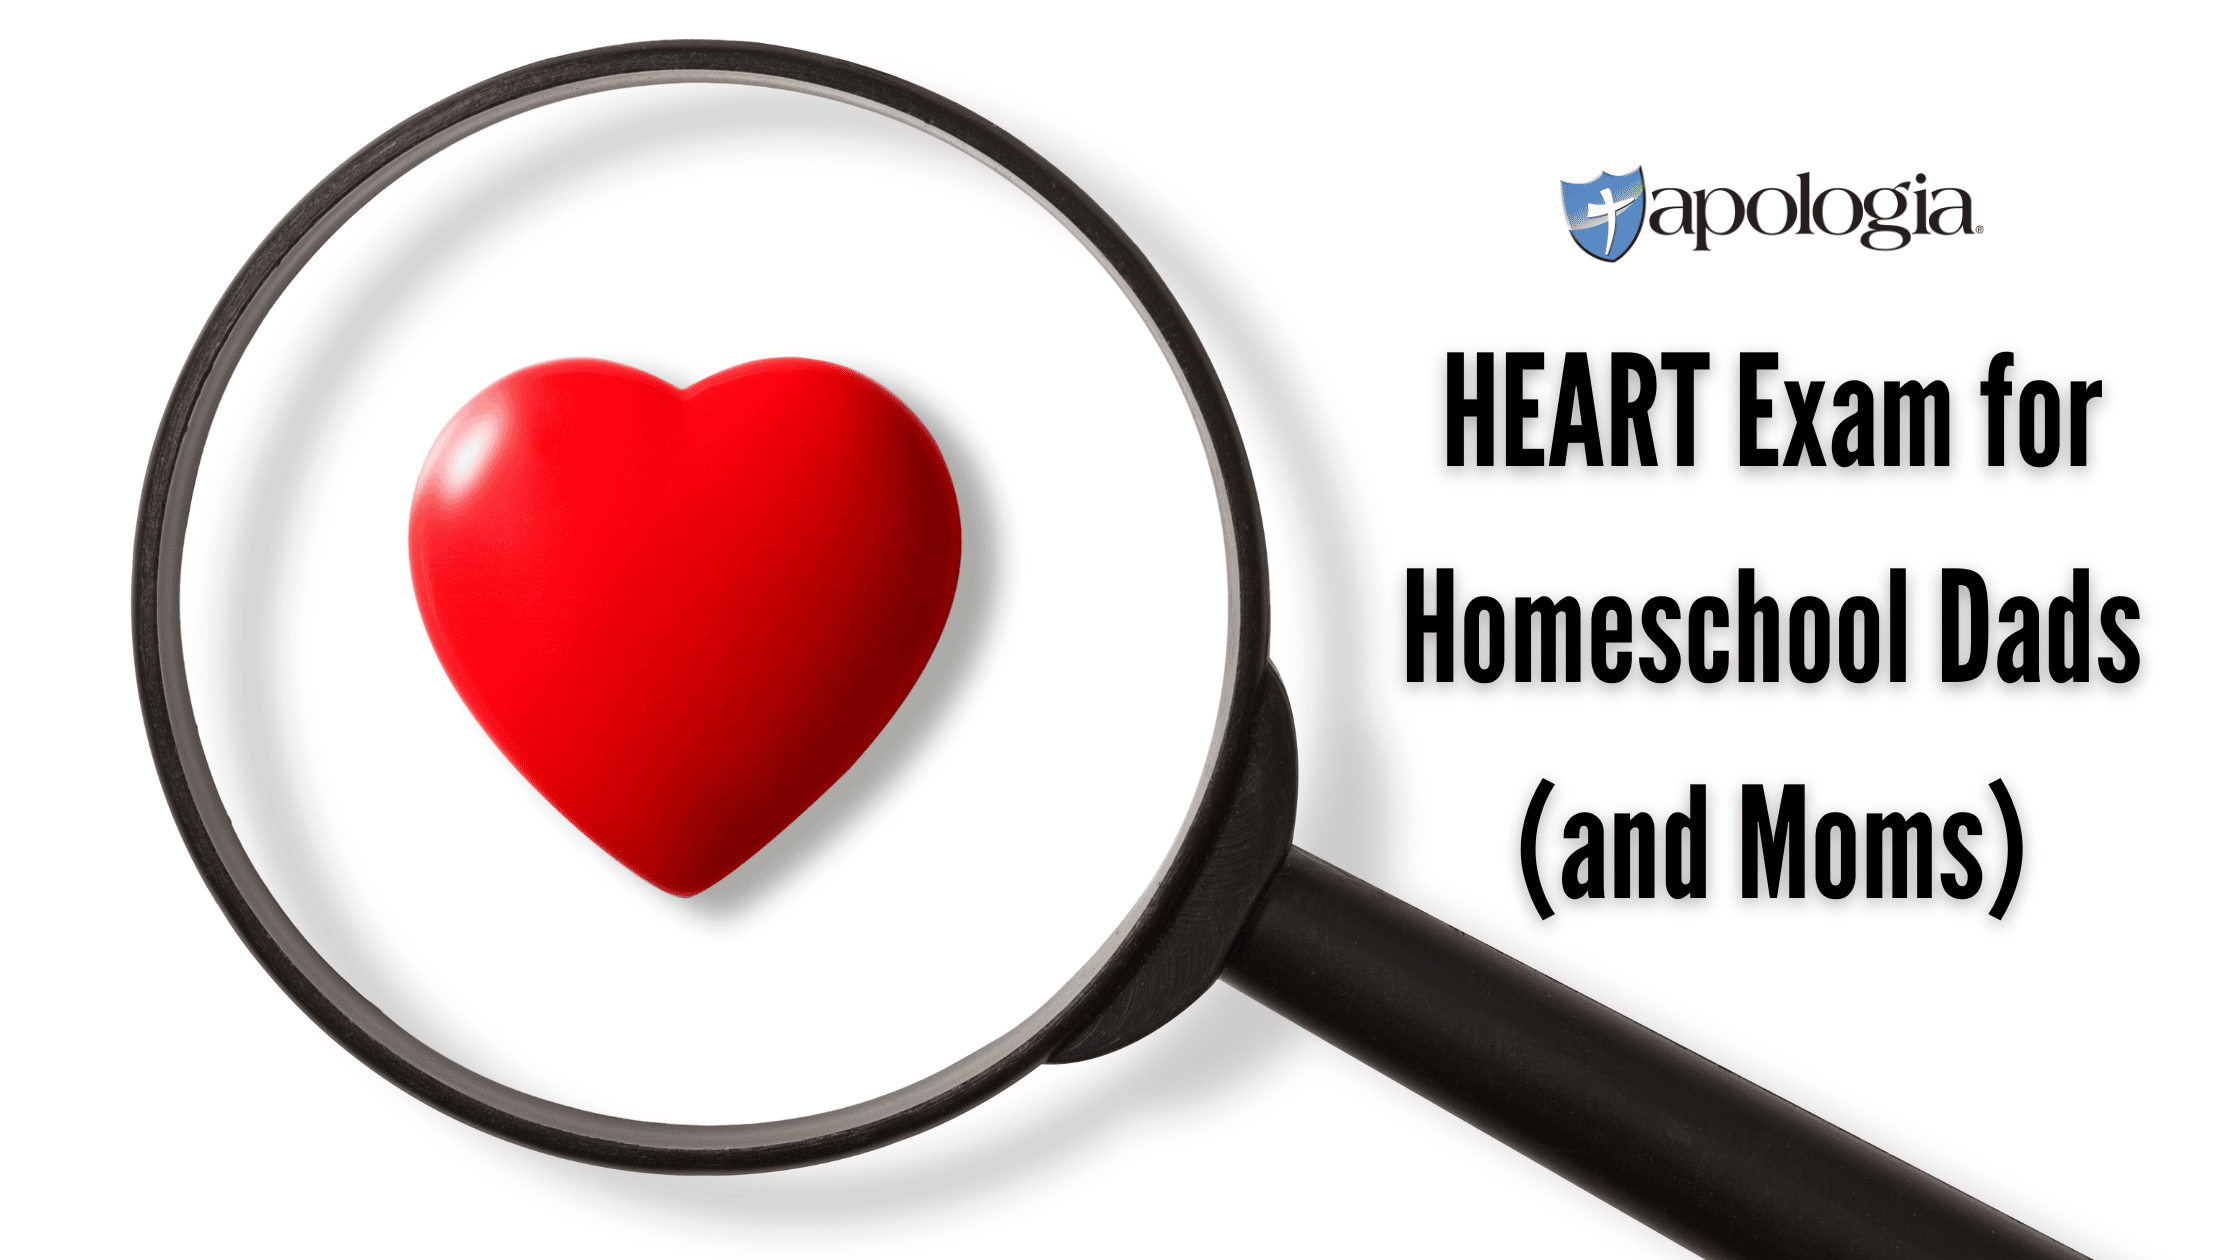 HEART Exam for Homeschool Dads (and Moms)